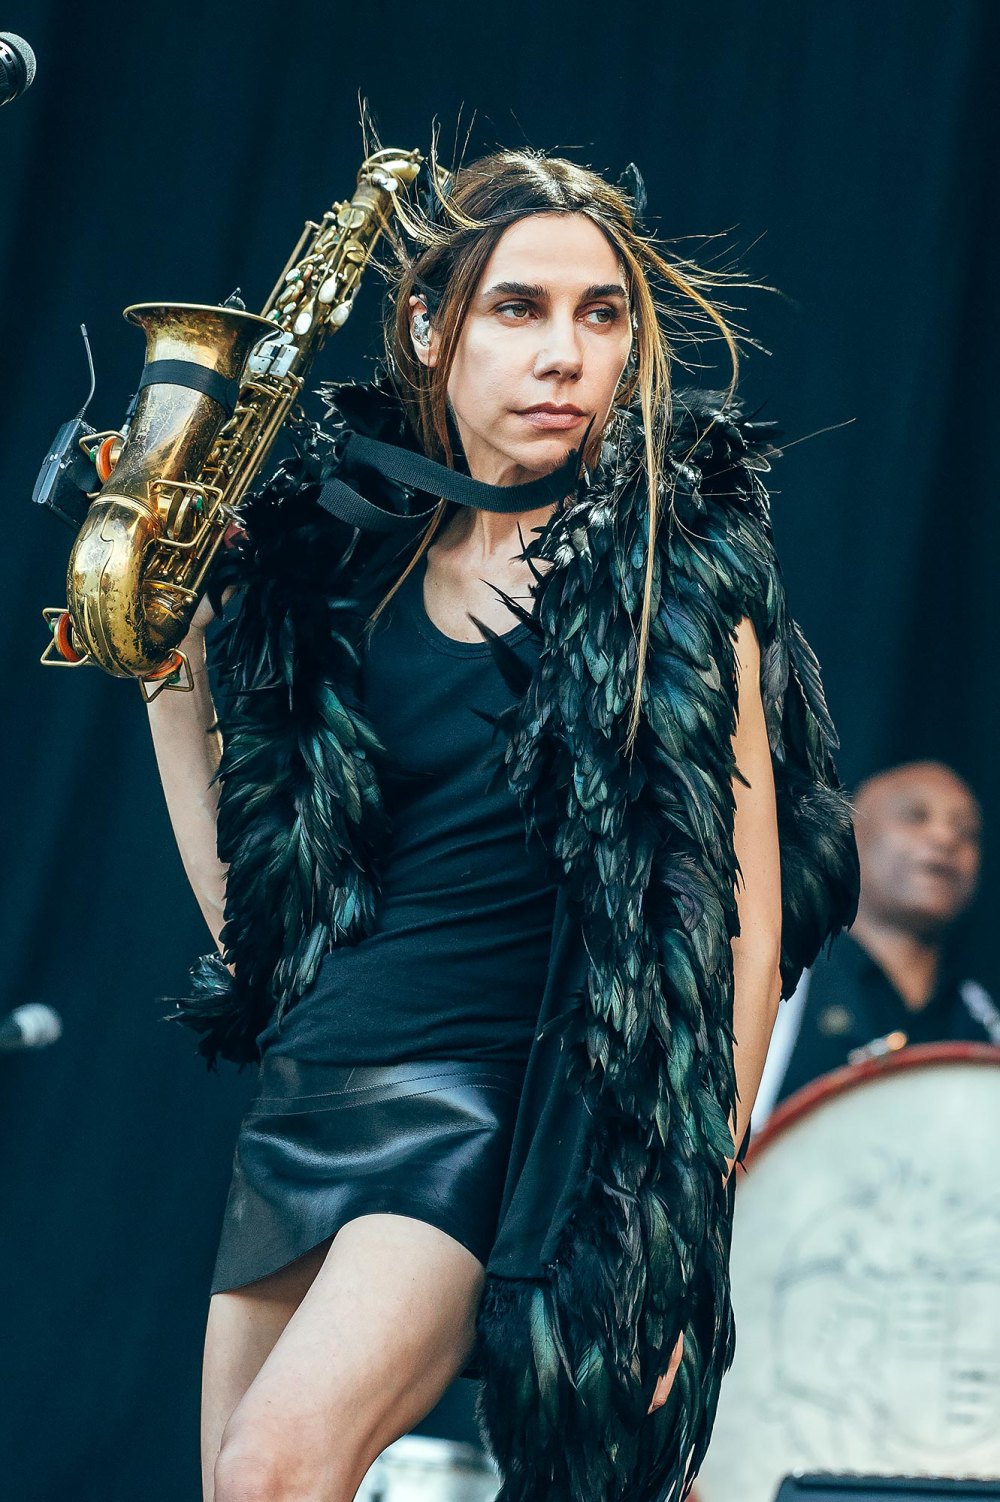 PJ Harvey Announces First North American Tour in 7 Years and shares ‘Seem an I’ Video